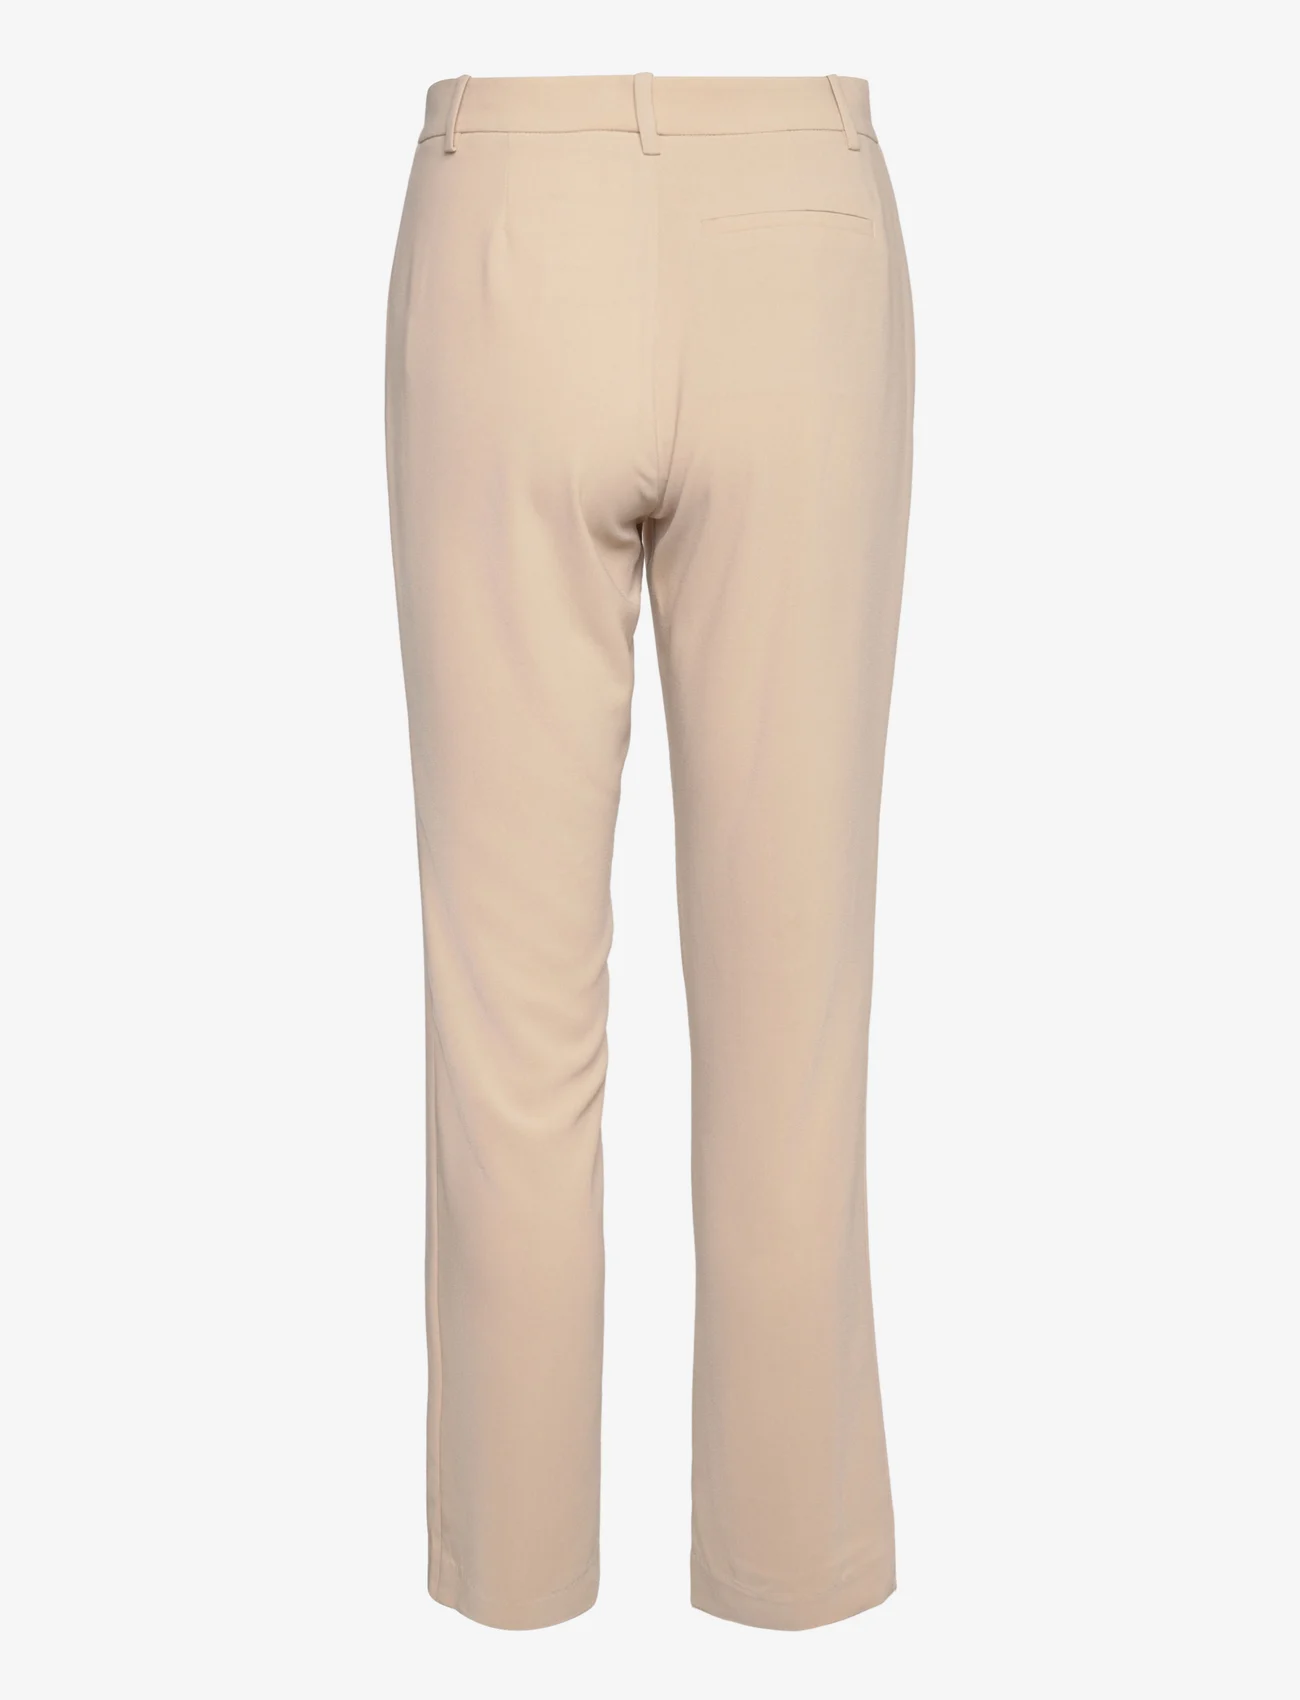 Marville Road - Christie Stretch Crepe Trousers - dressbukser - beige - 1